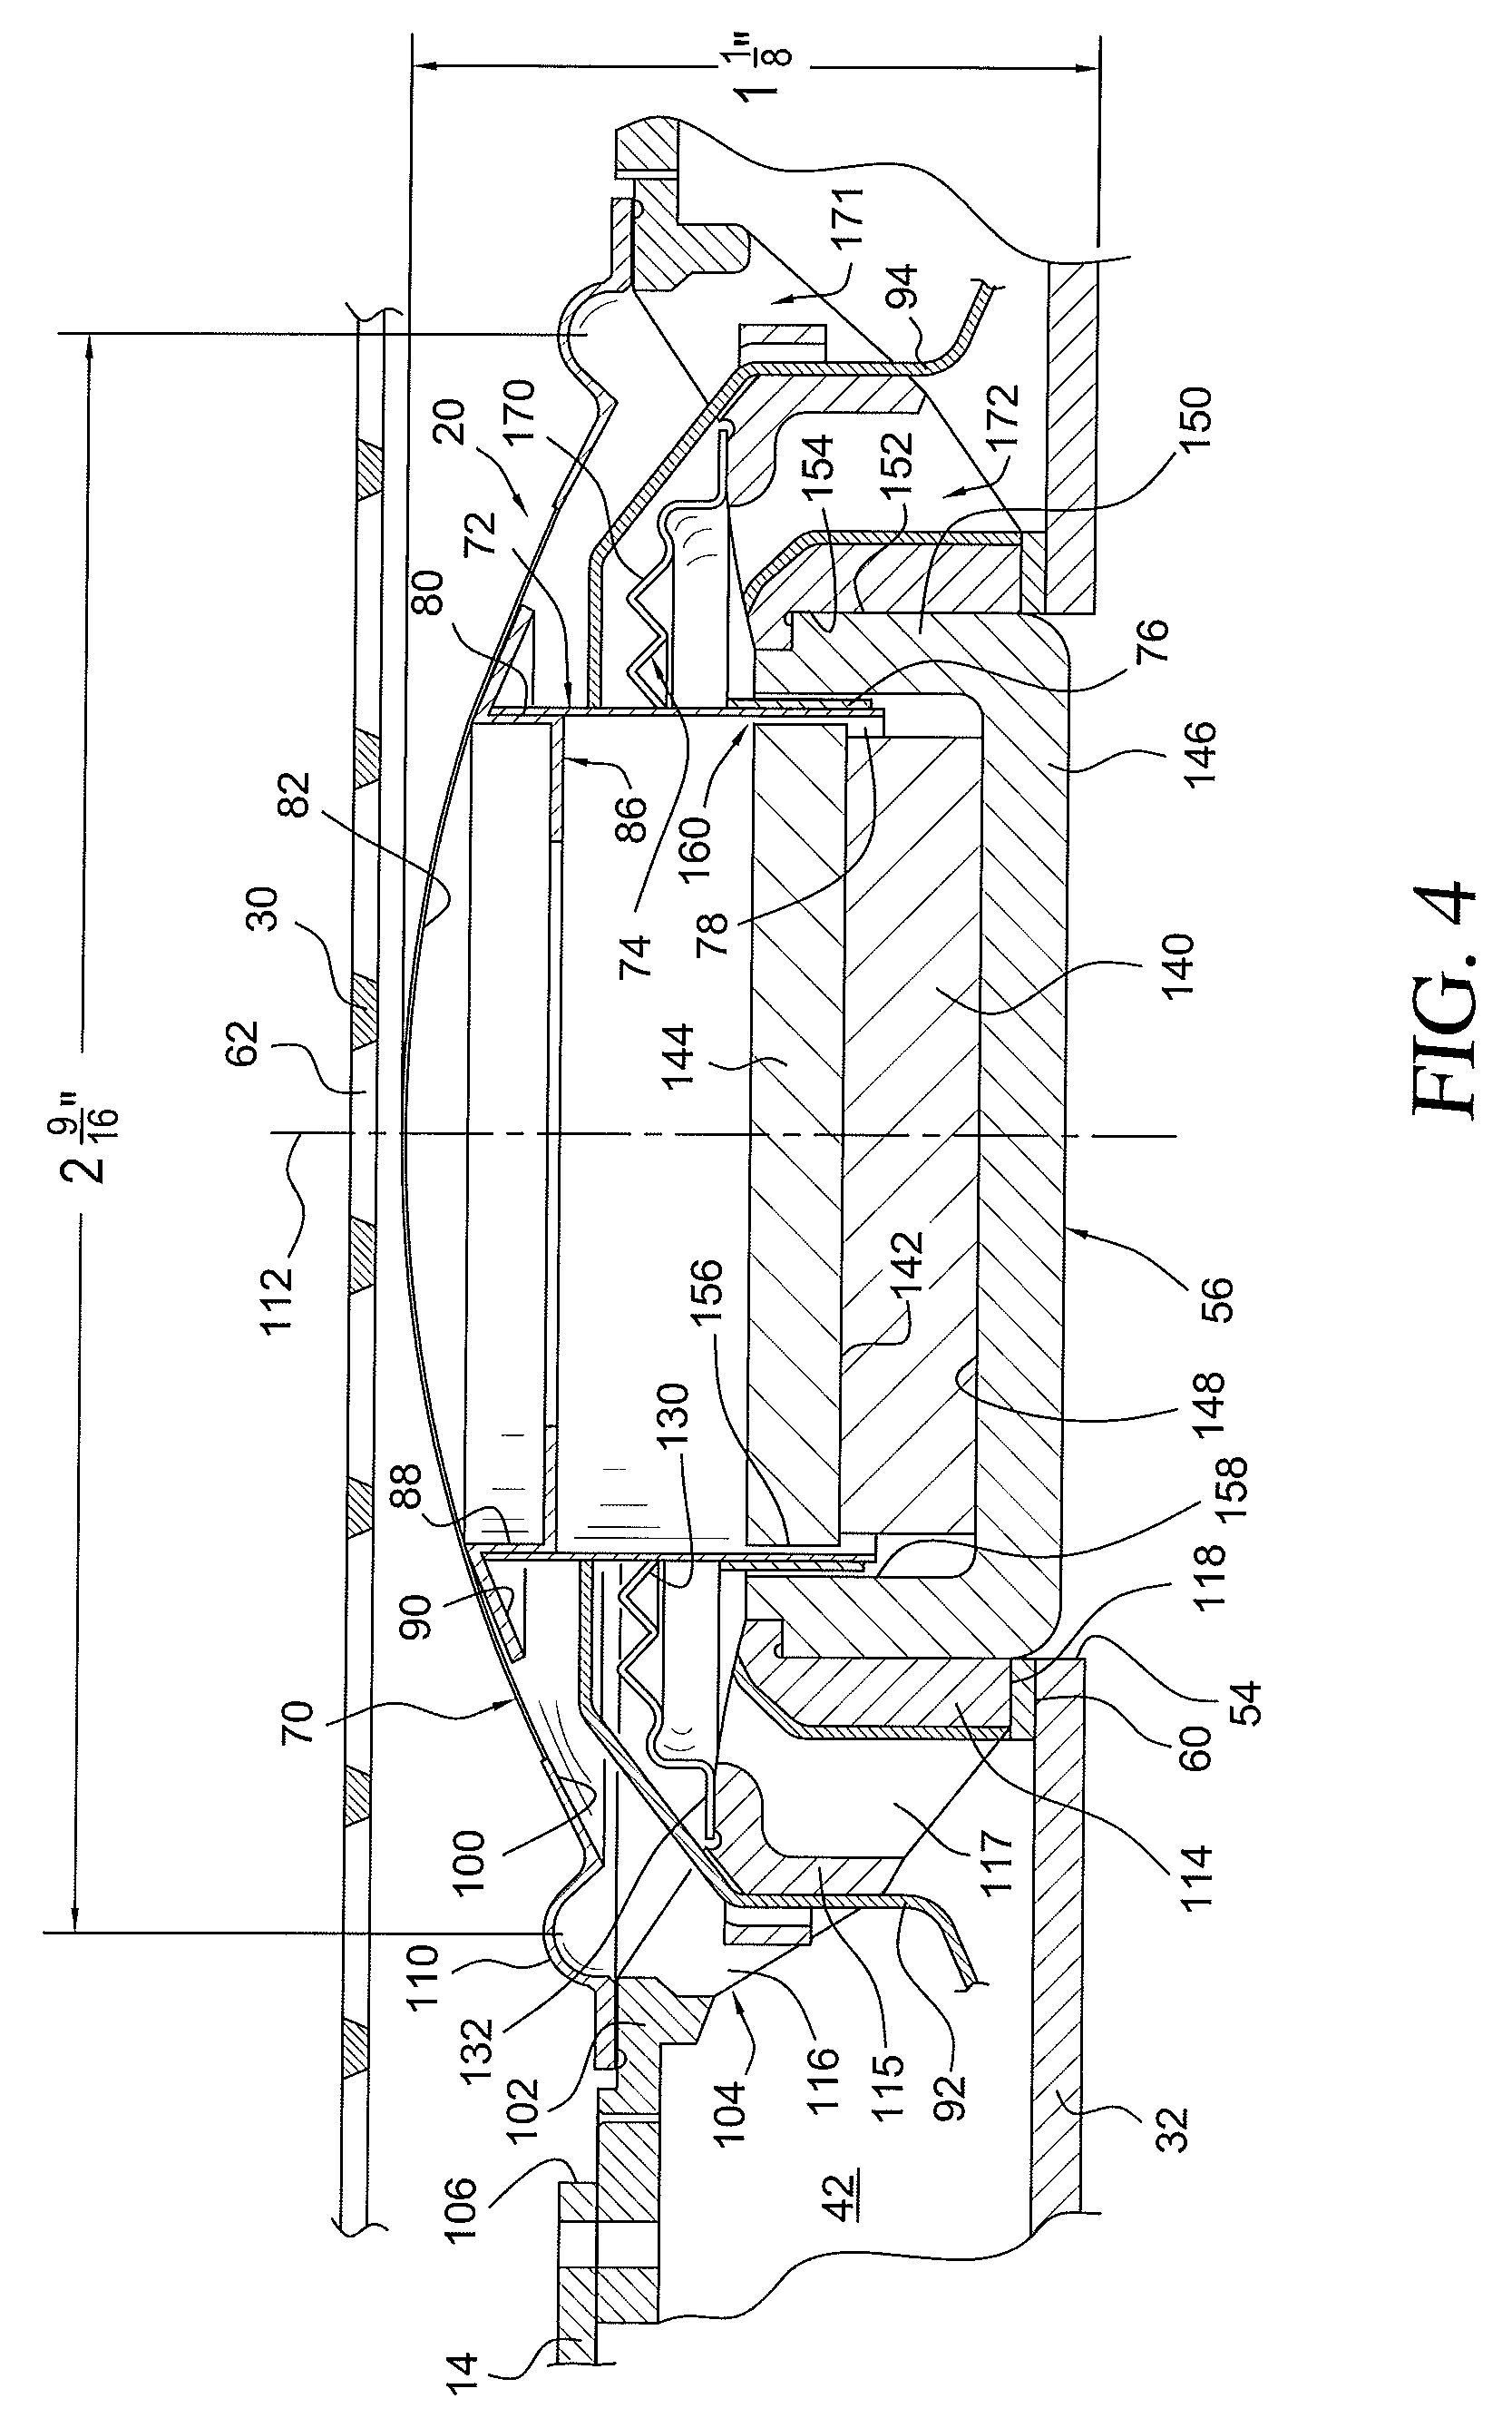 Low-Profile Loudspeaker Driver and Enclosure Assembly